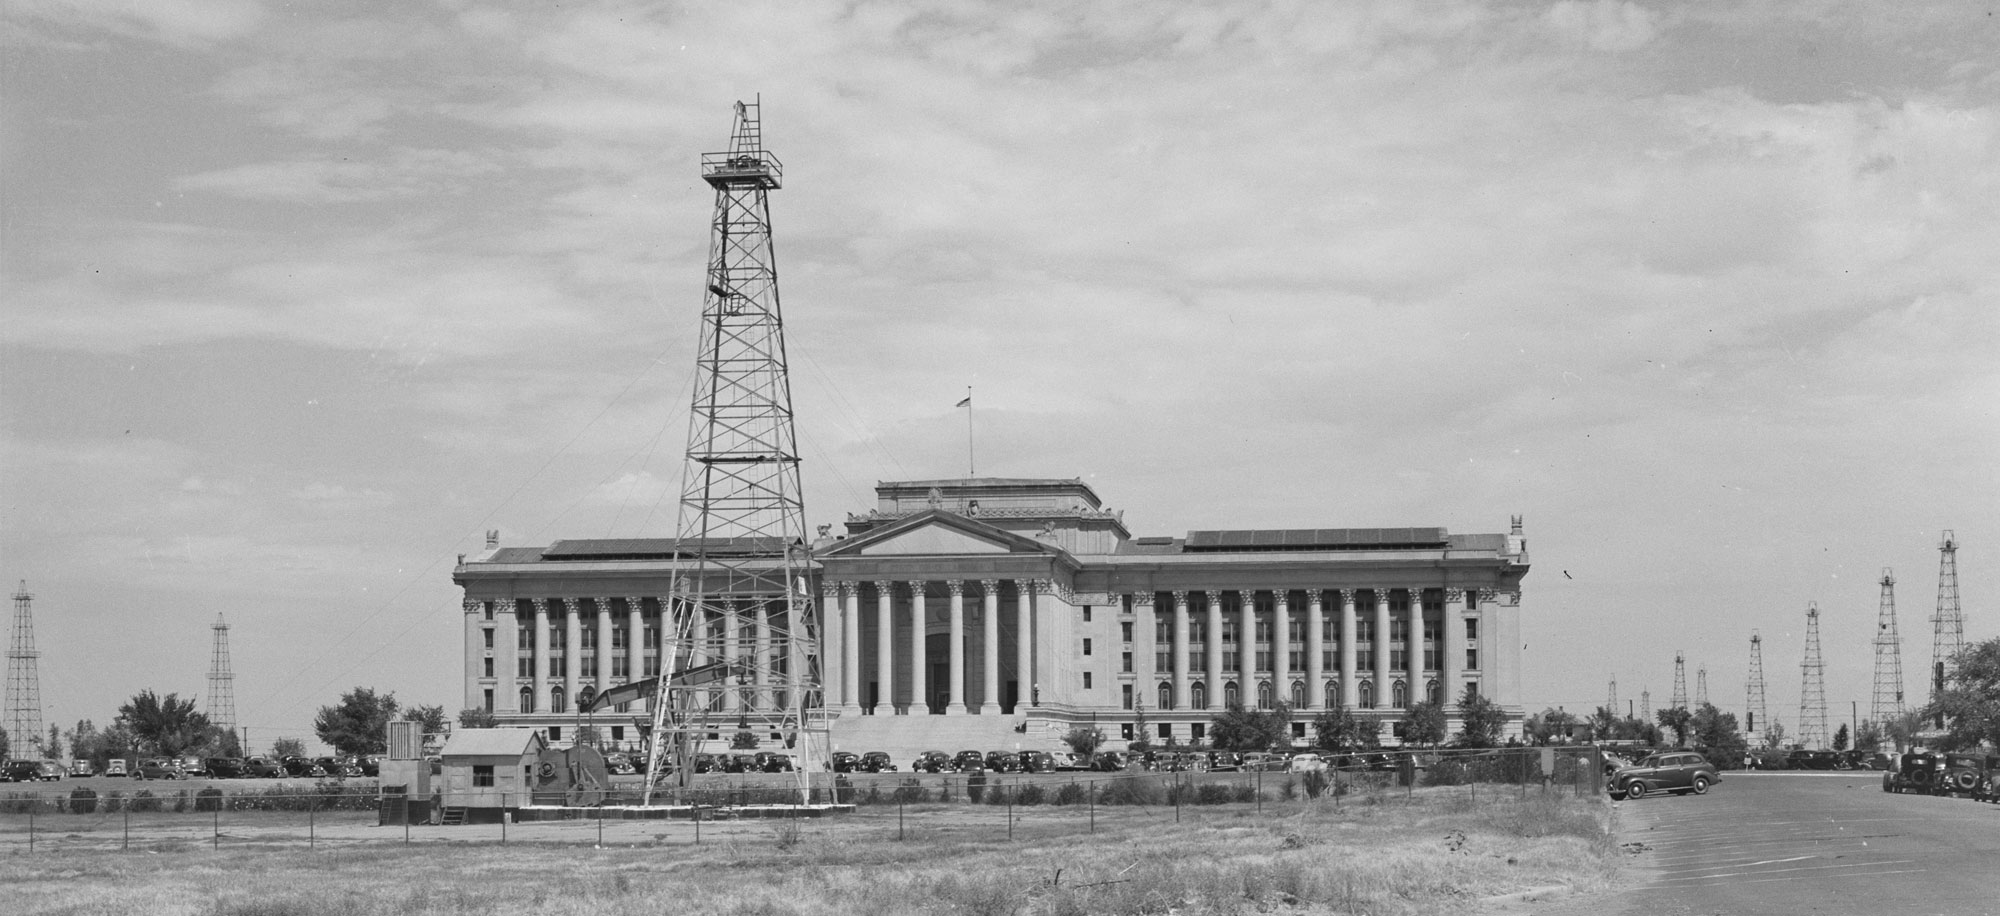 Black-and-whtie photo of oil derricks around the state capital building in Oklahoma City, Oklahoma, 1939.